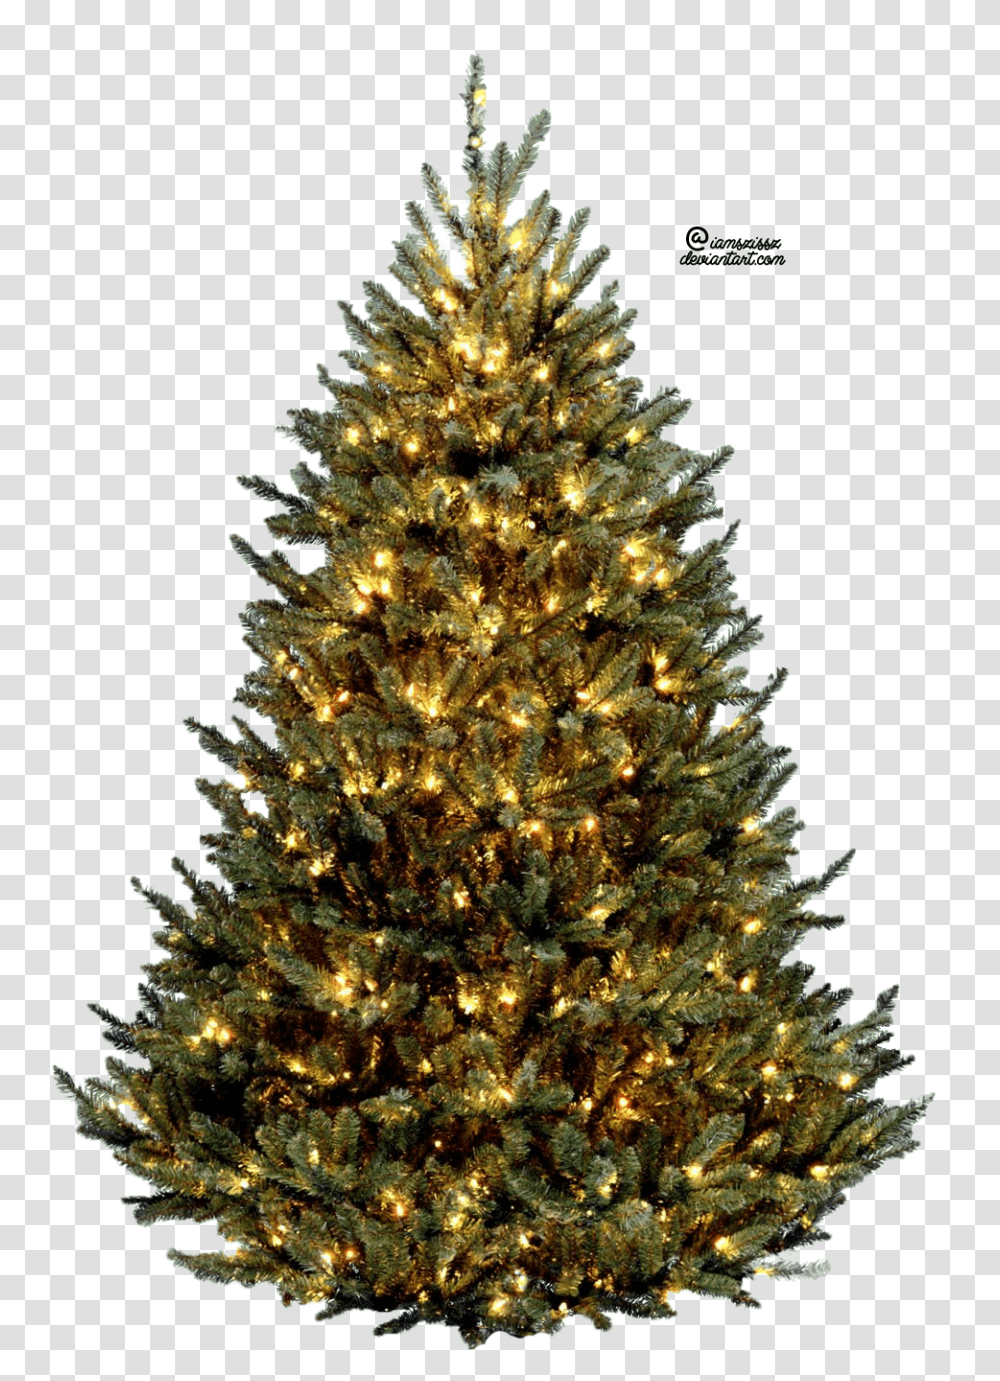 Christmas Tree Download Cliparts Only Clipground Christmas Tree With Lights, Ornament, Plant, Fir, Abies Transparent Png